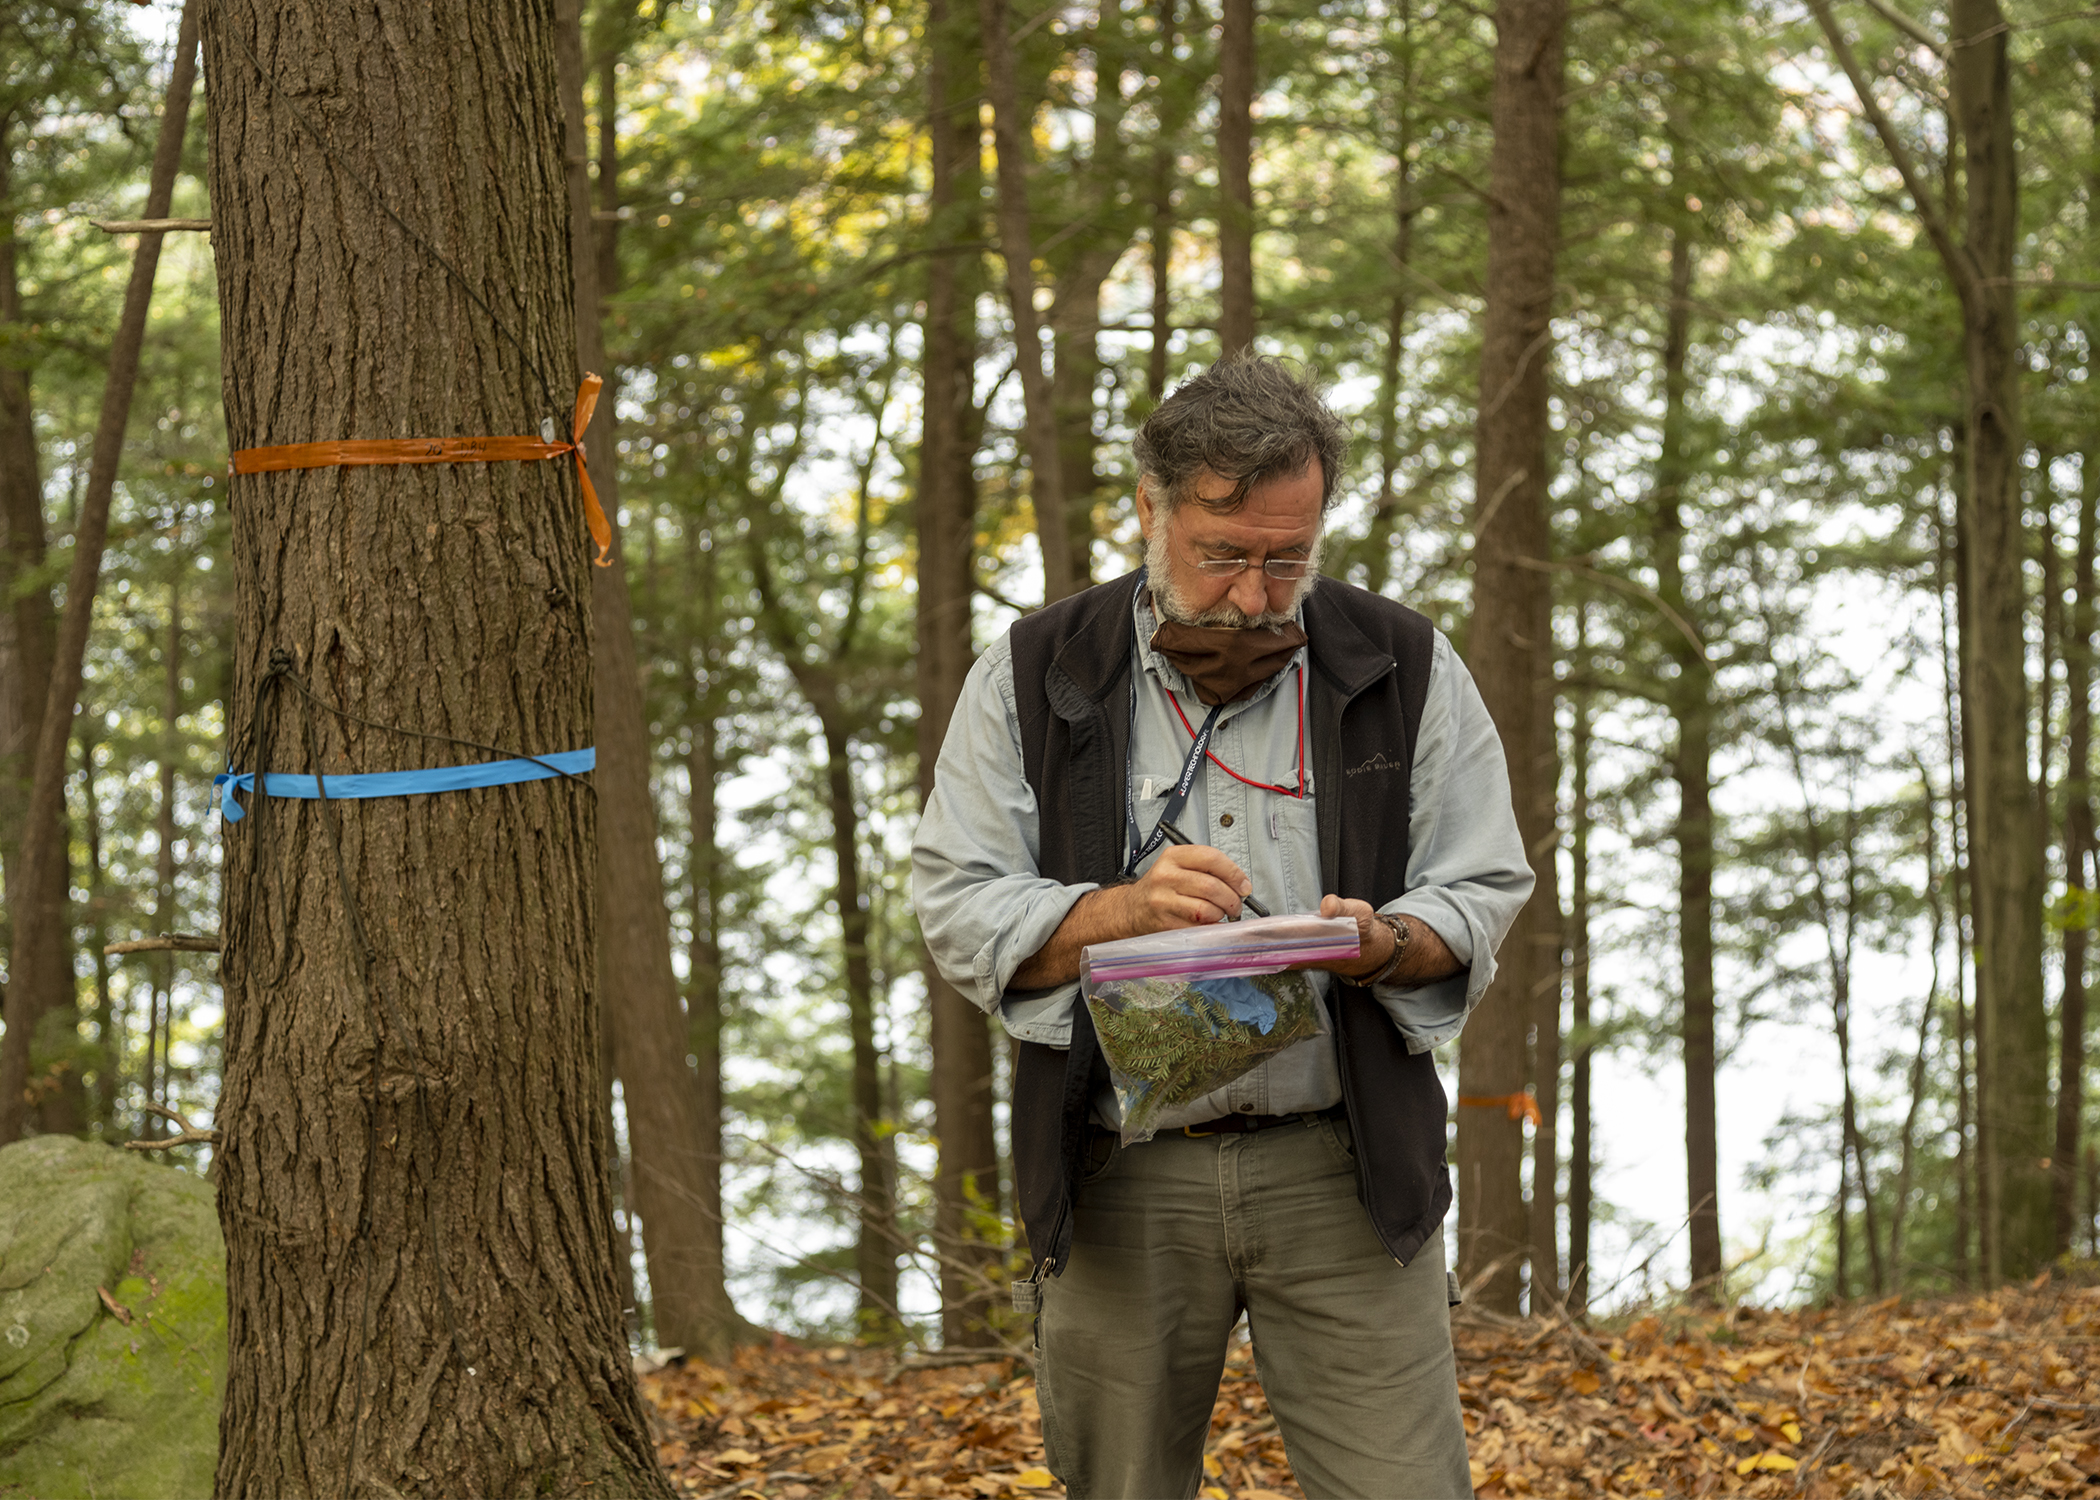 Dr. Mark Whitmore inspects a hemlock branch